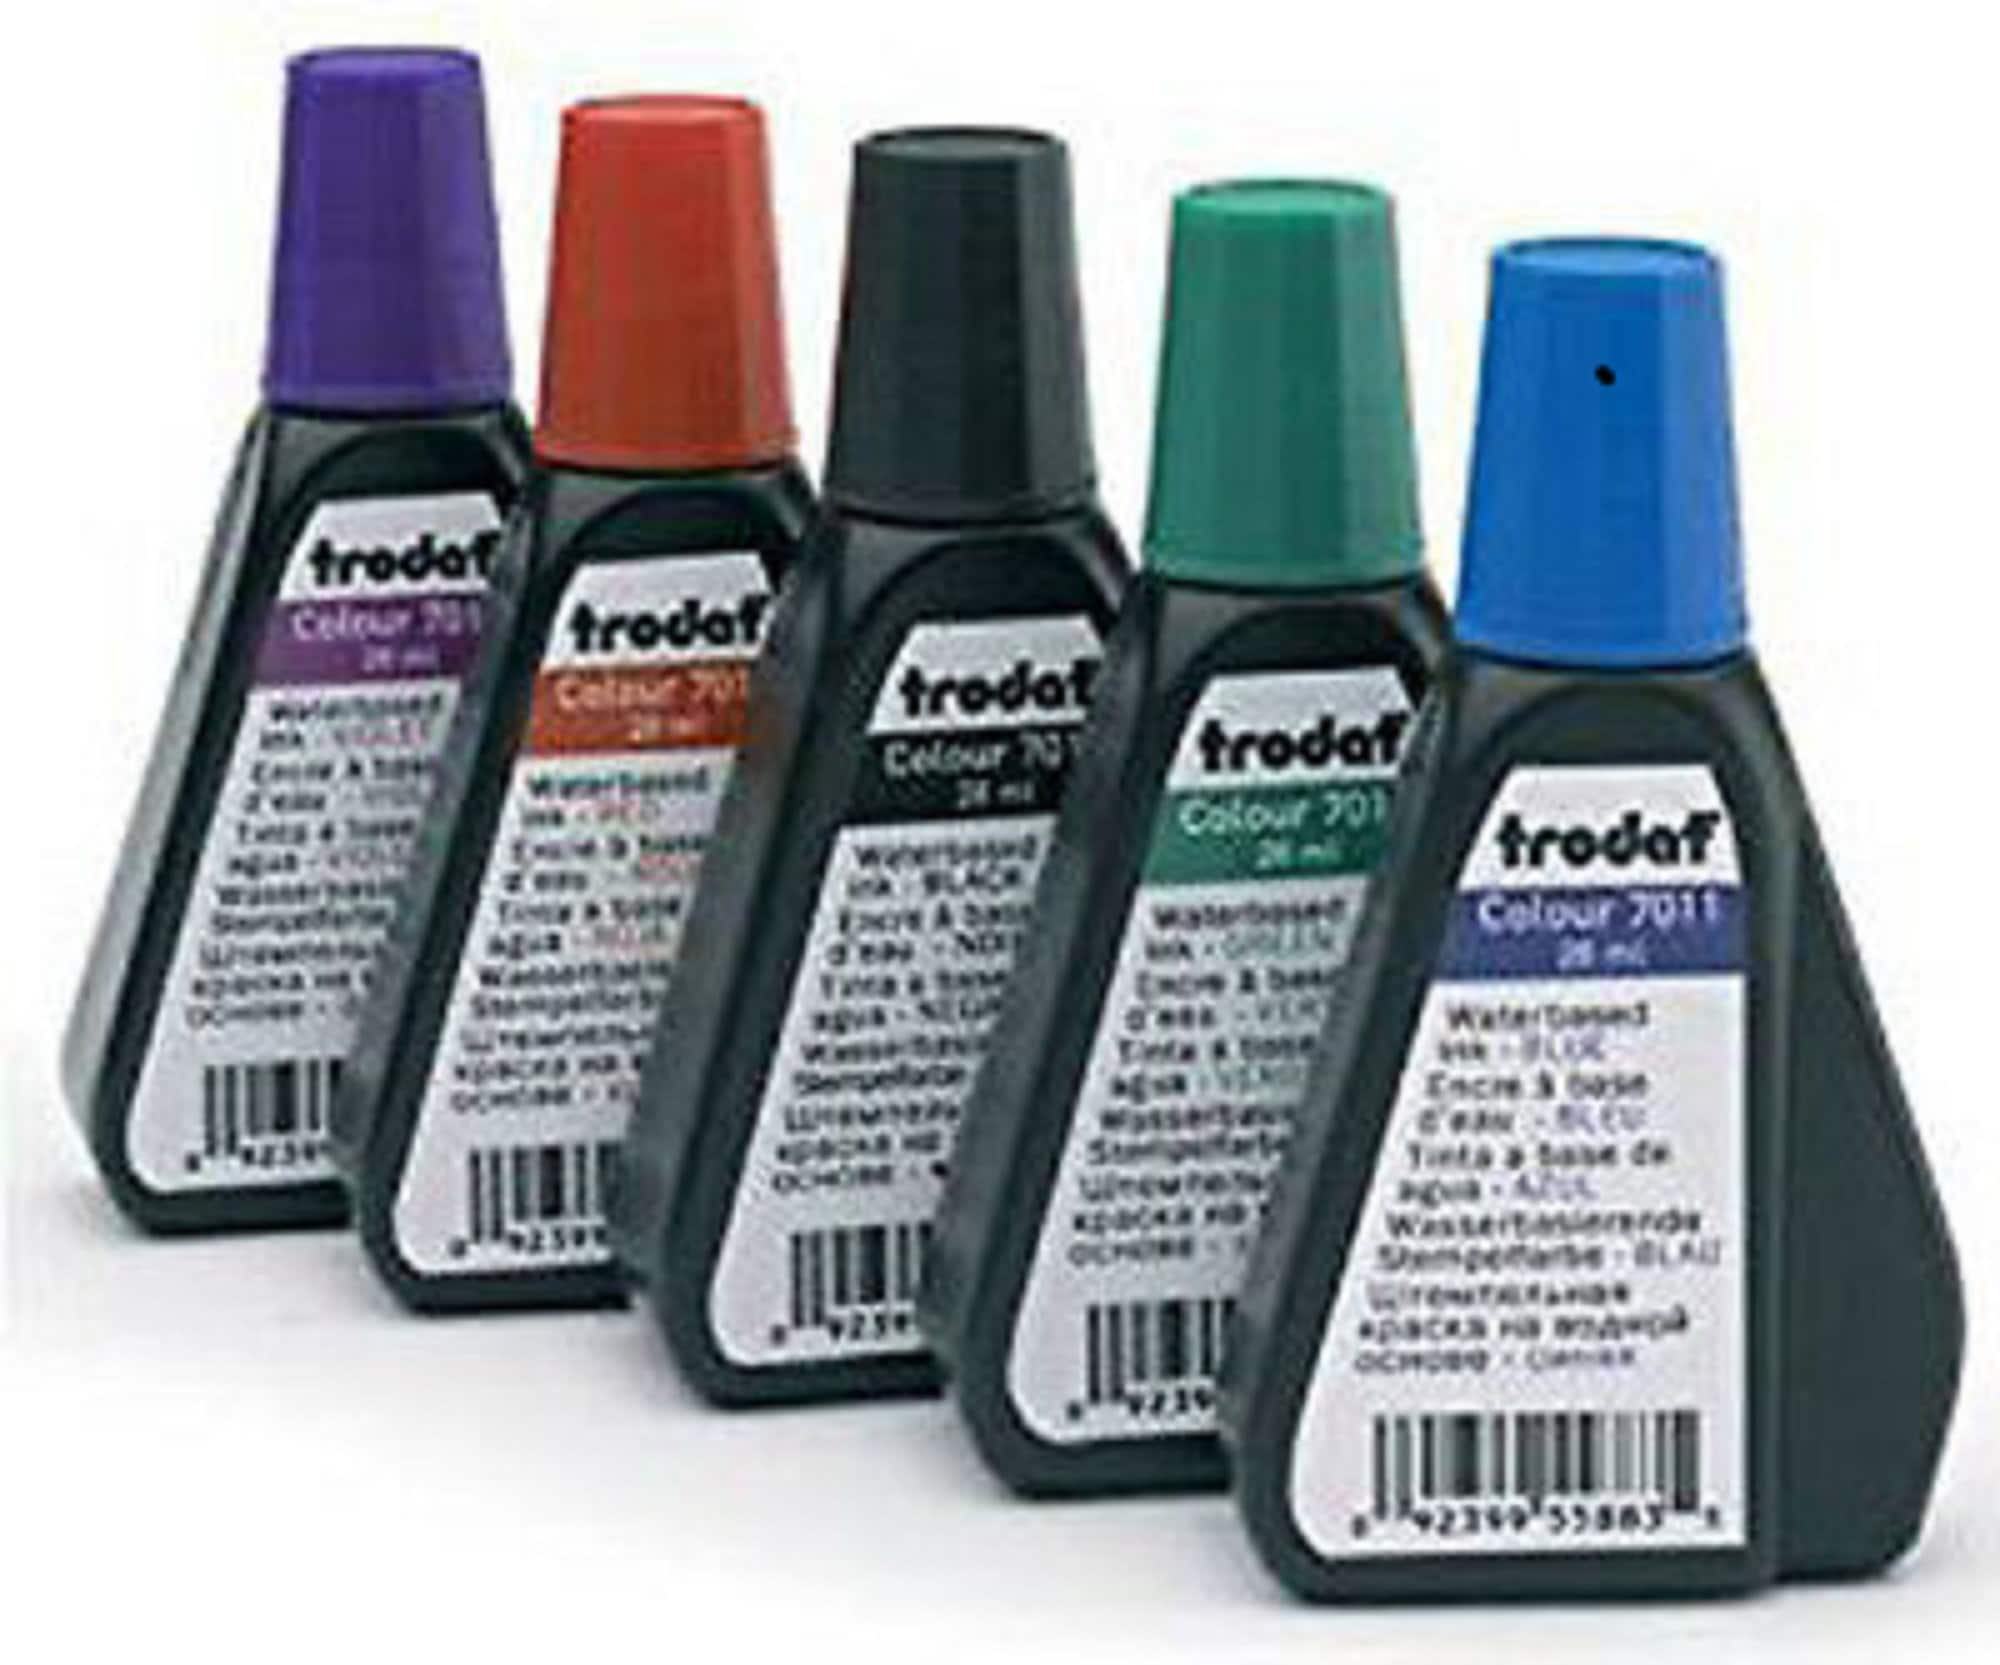 Ink for Pre-Inked Stamps